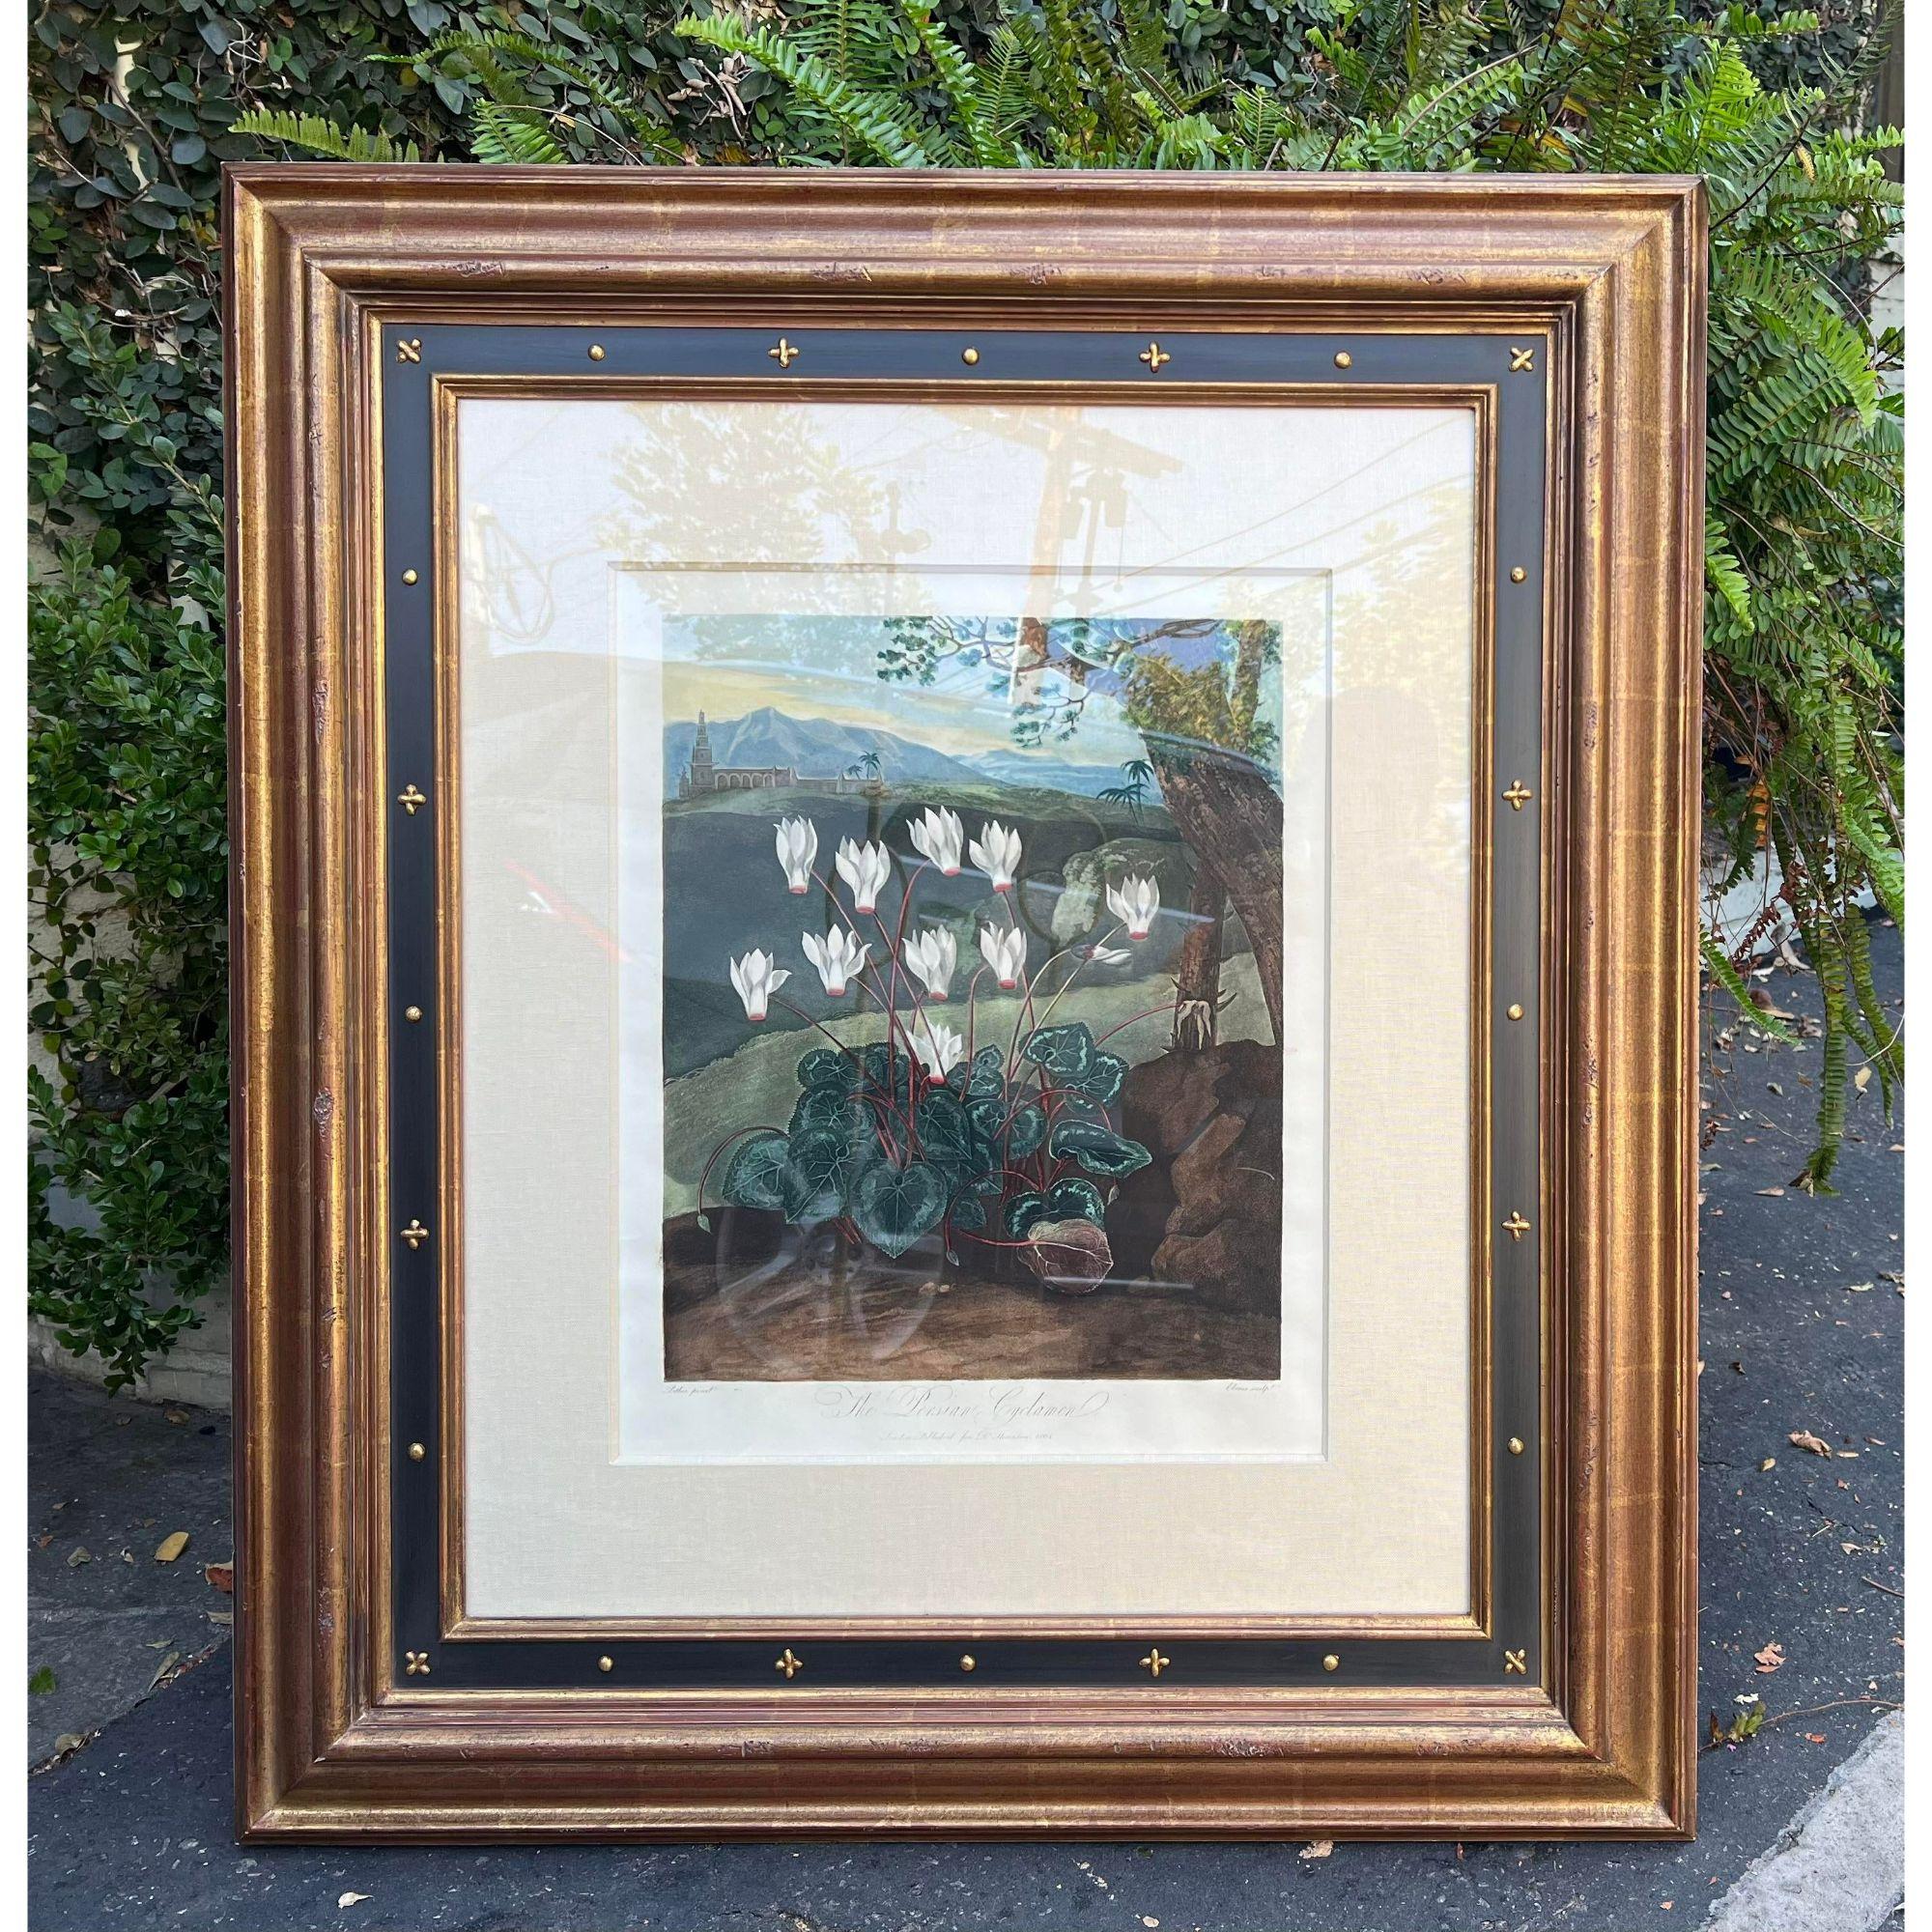 Antique Botanical Print - the Persian Cyclamen by Thornton, Robert John c.1804. It is exquisitely framed in a gold and black empire style star clad giltwood frame

Additional information: 
Materials: Giltwood, Paper
Color: Blue
Period: Early